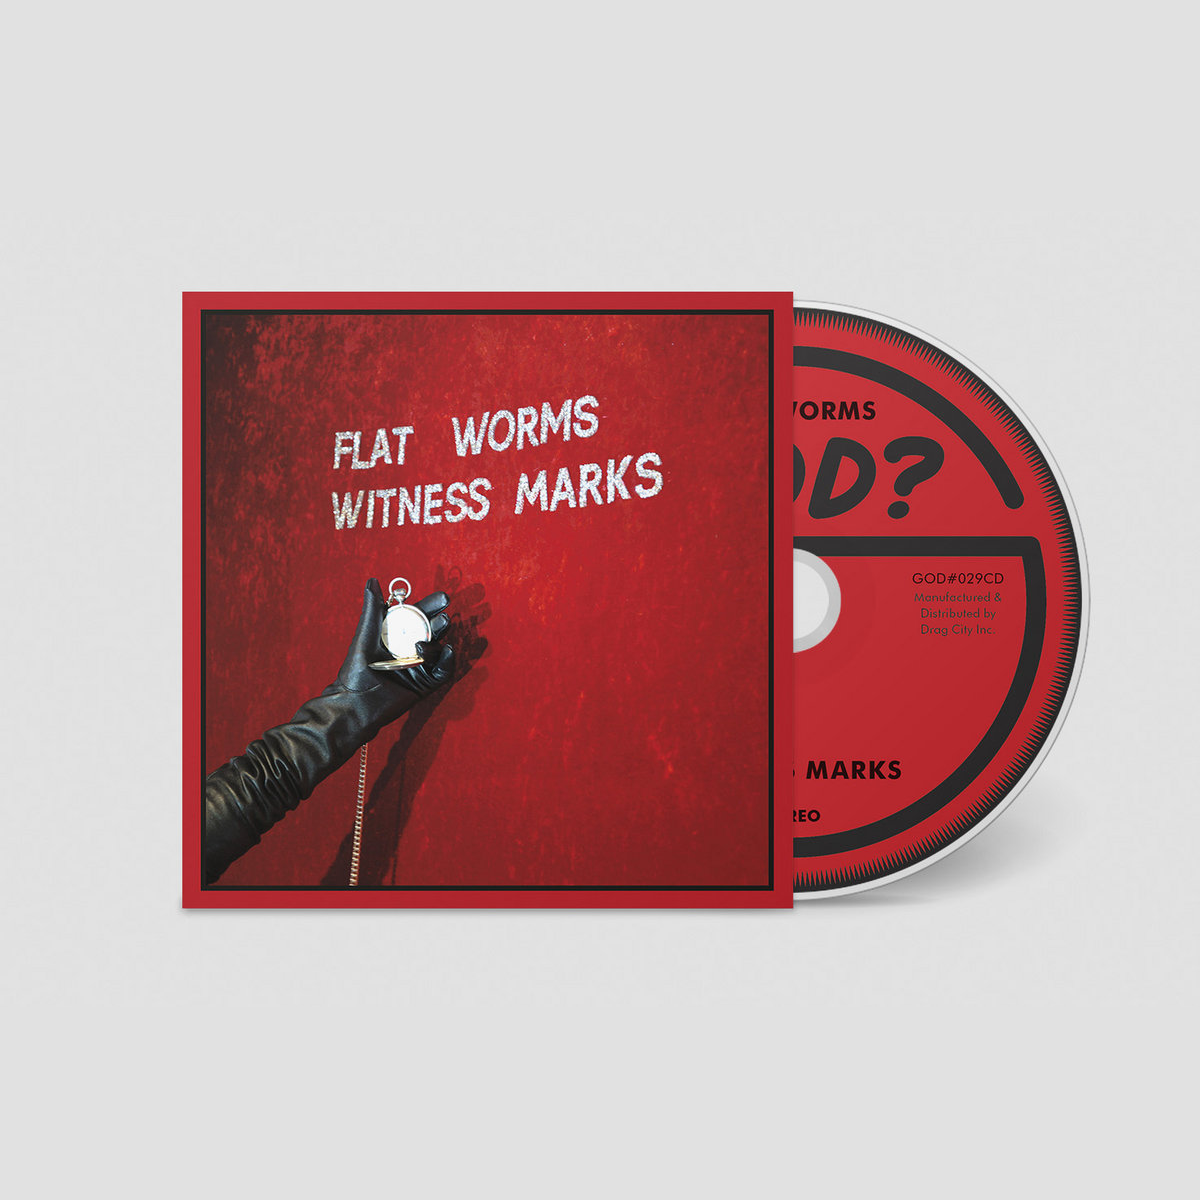 Flat Worms - Witness Marks: CD